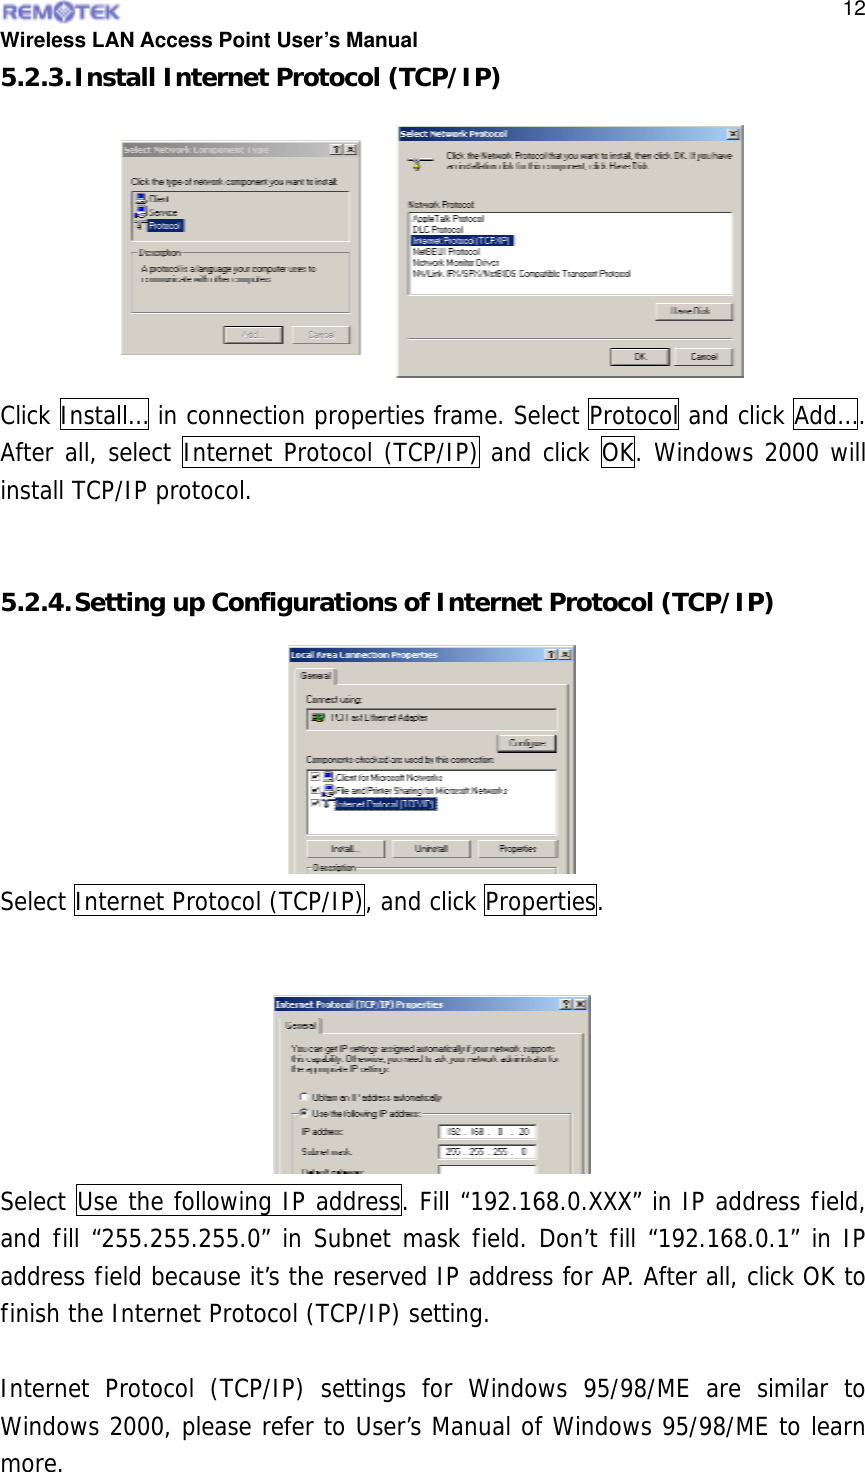  Wireless LAN Access Point User’s Manual  125.2.3. Install Internet Protocol (TCP/IP) Click Install… in connection properties frame. Select Protocol and click Add…. After all, select Internet Protocol (TCP/IP) and click OK. Windows 2000 will install TCP/IP protocol.    5.2.4. Setting up Configurations of Internet Protocol (TCP/IP)  Select Internet Protocol (TCP/IP), and click Properties.  Select Use the following IP address. Fill “192.168.0.XXX” in IP address field, and fill “255.255.255.0” in Subnet mask field. Don’t fill “192.168.0.1” in IP address field because it’s the reserved IP address for AP. After all, click OK to finish the Internet Protocol (TCP/IP) setting.  Internet Protocol (TCP/IP) settings for Windows 95/98/ME are similar to Windows 2000, please refer to User’s Manual of Windows 95/98/ME to learn more.  